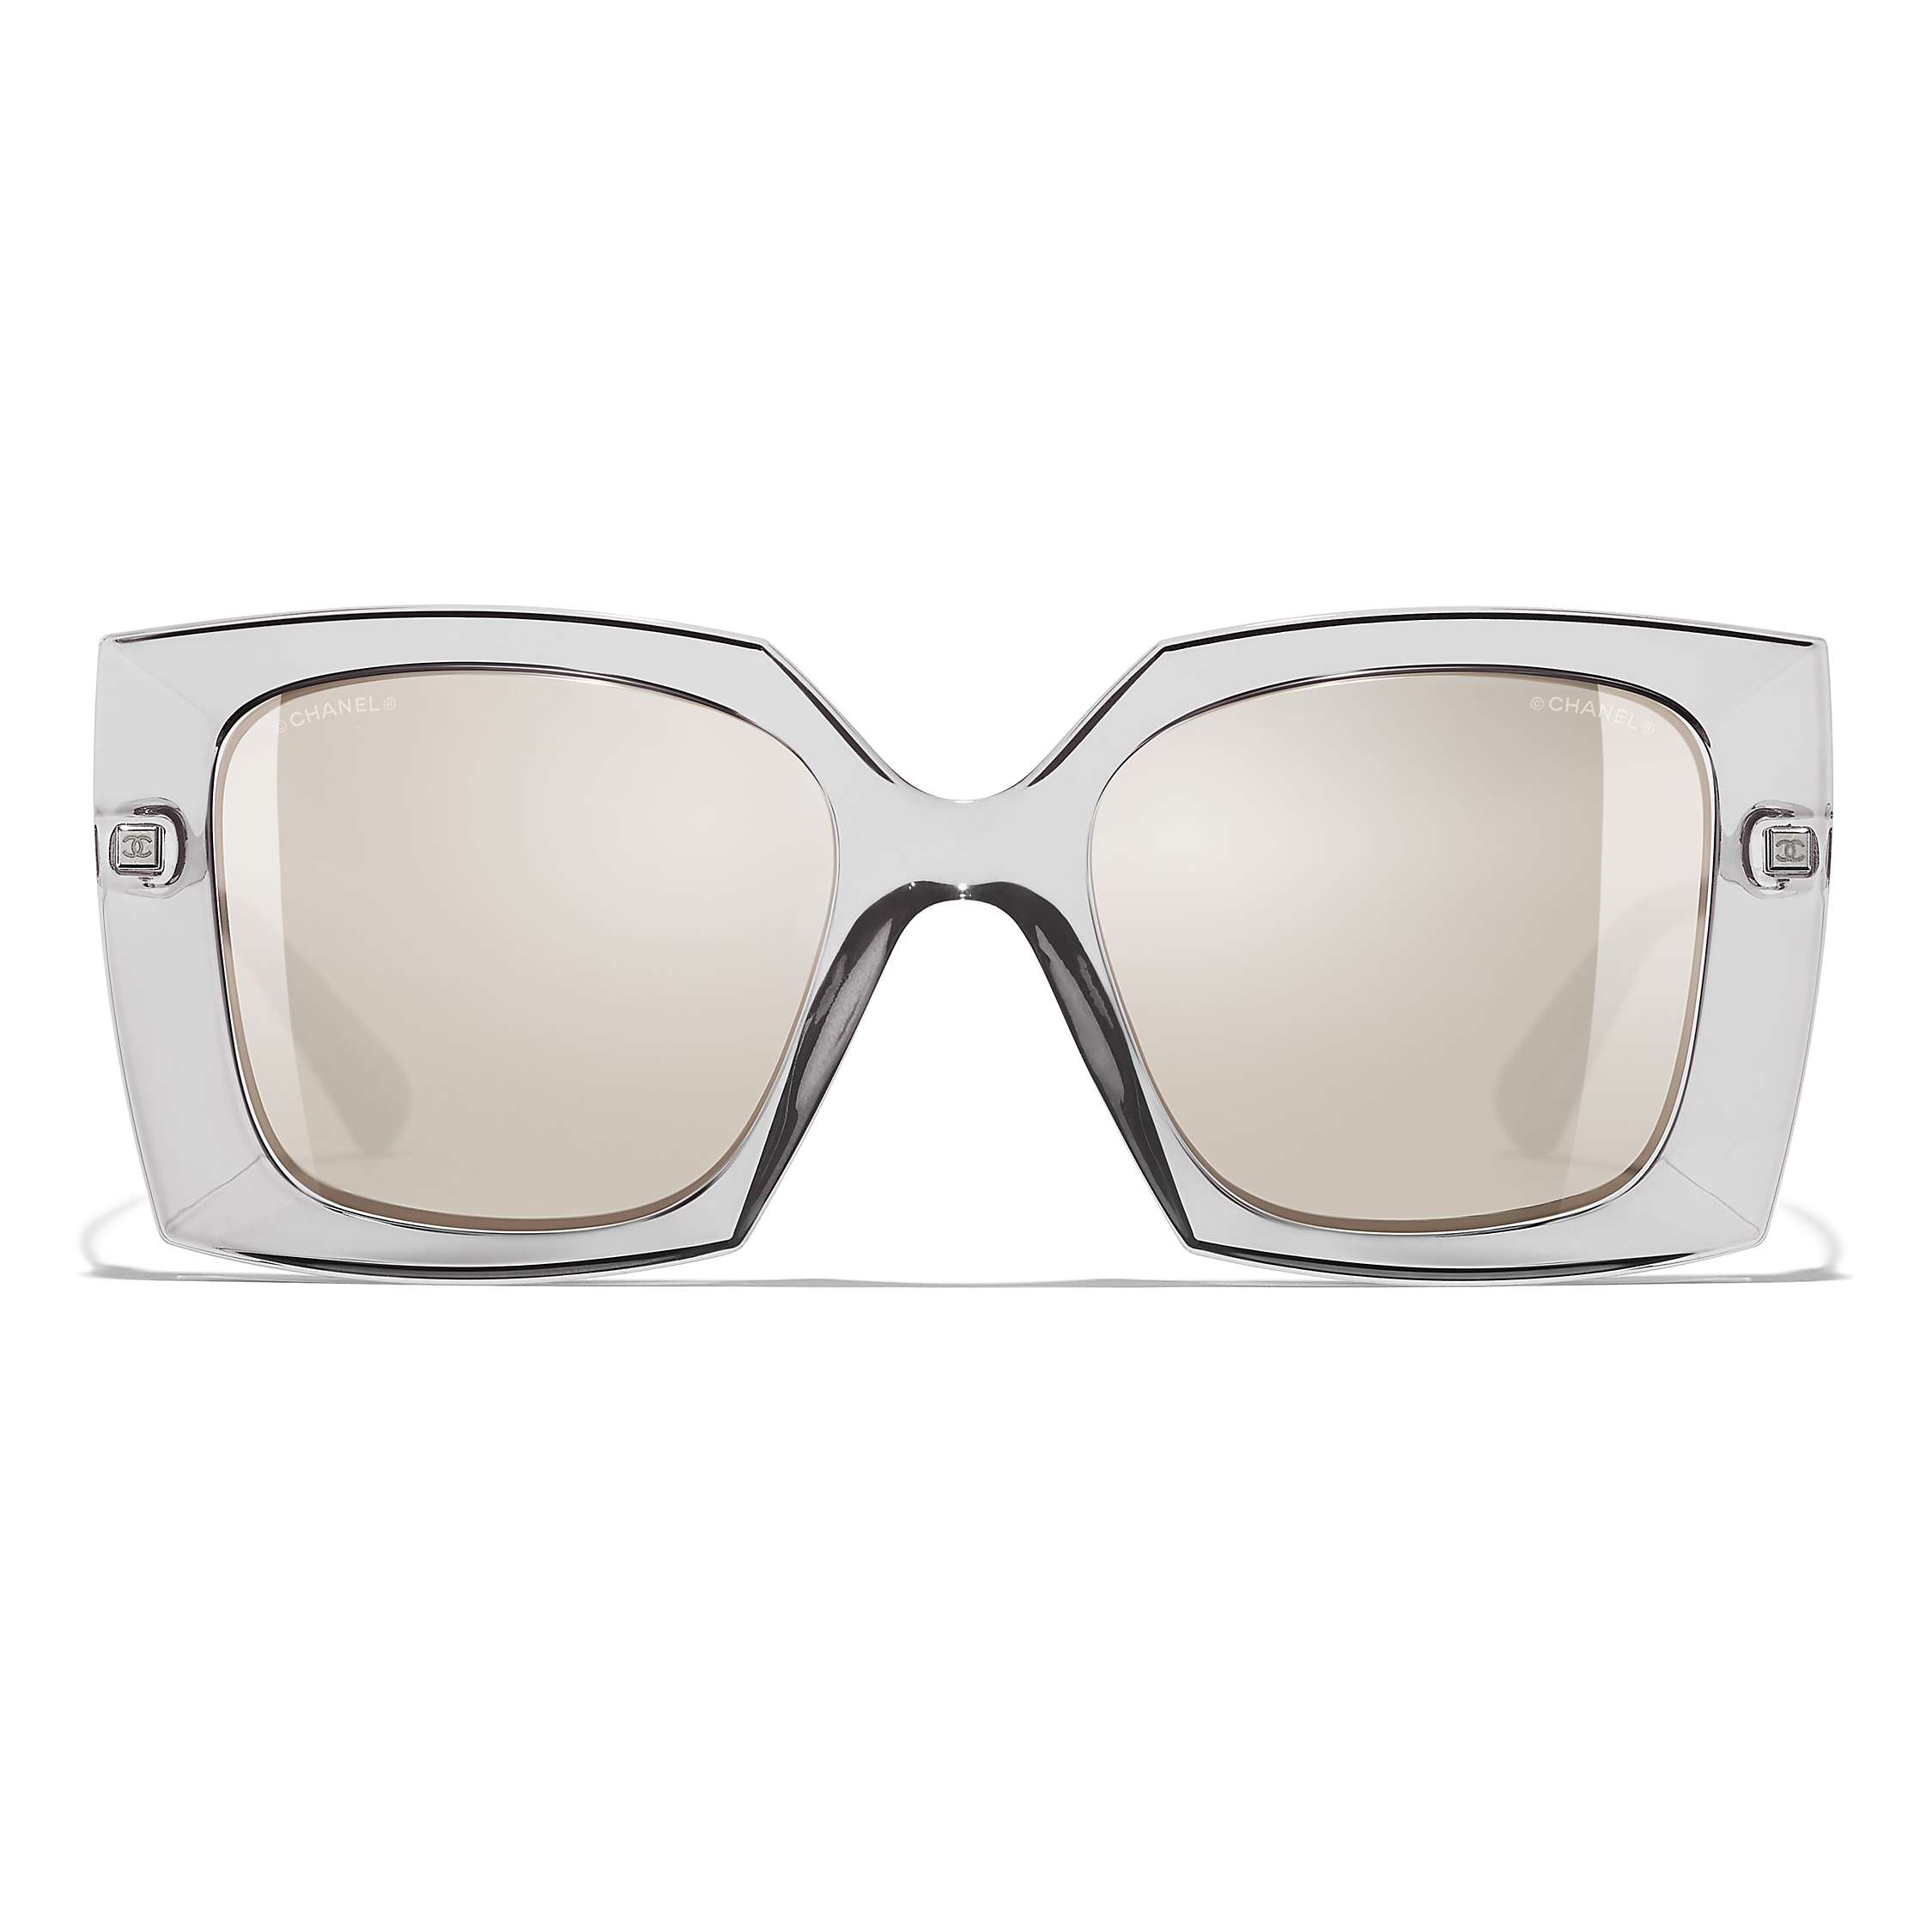 Buy CHANEL Square Sunglasses CH6051 Grey/Mirror Clear Online at johnlewis.com